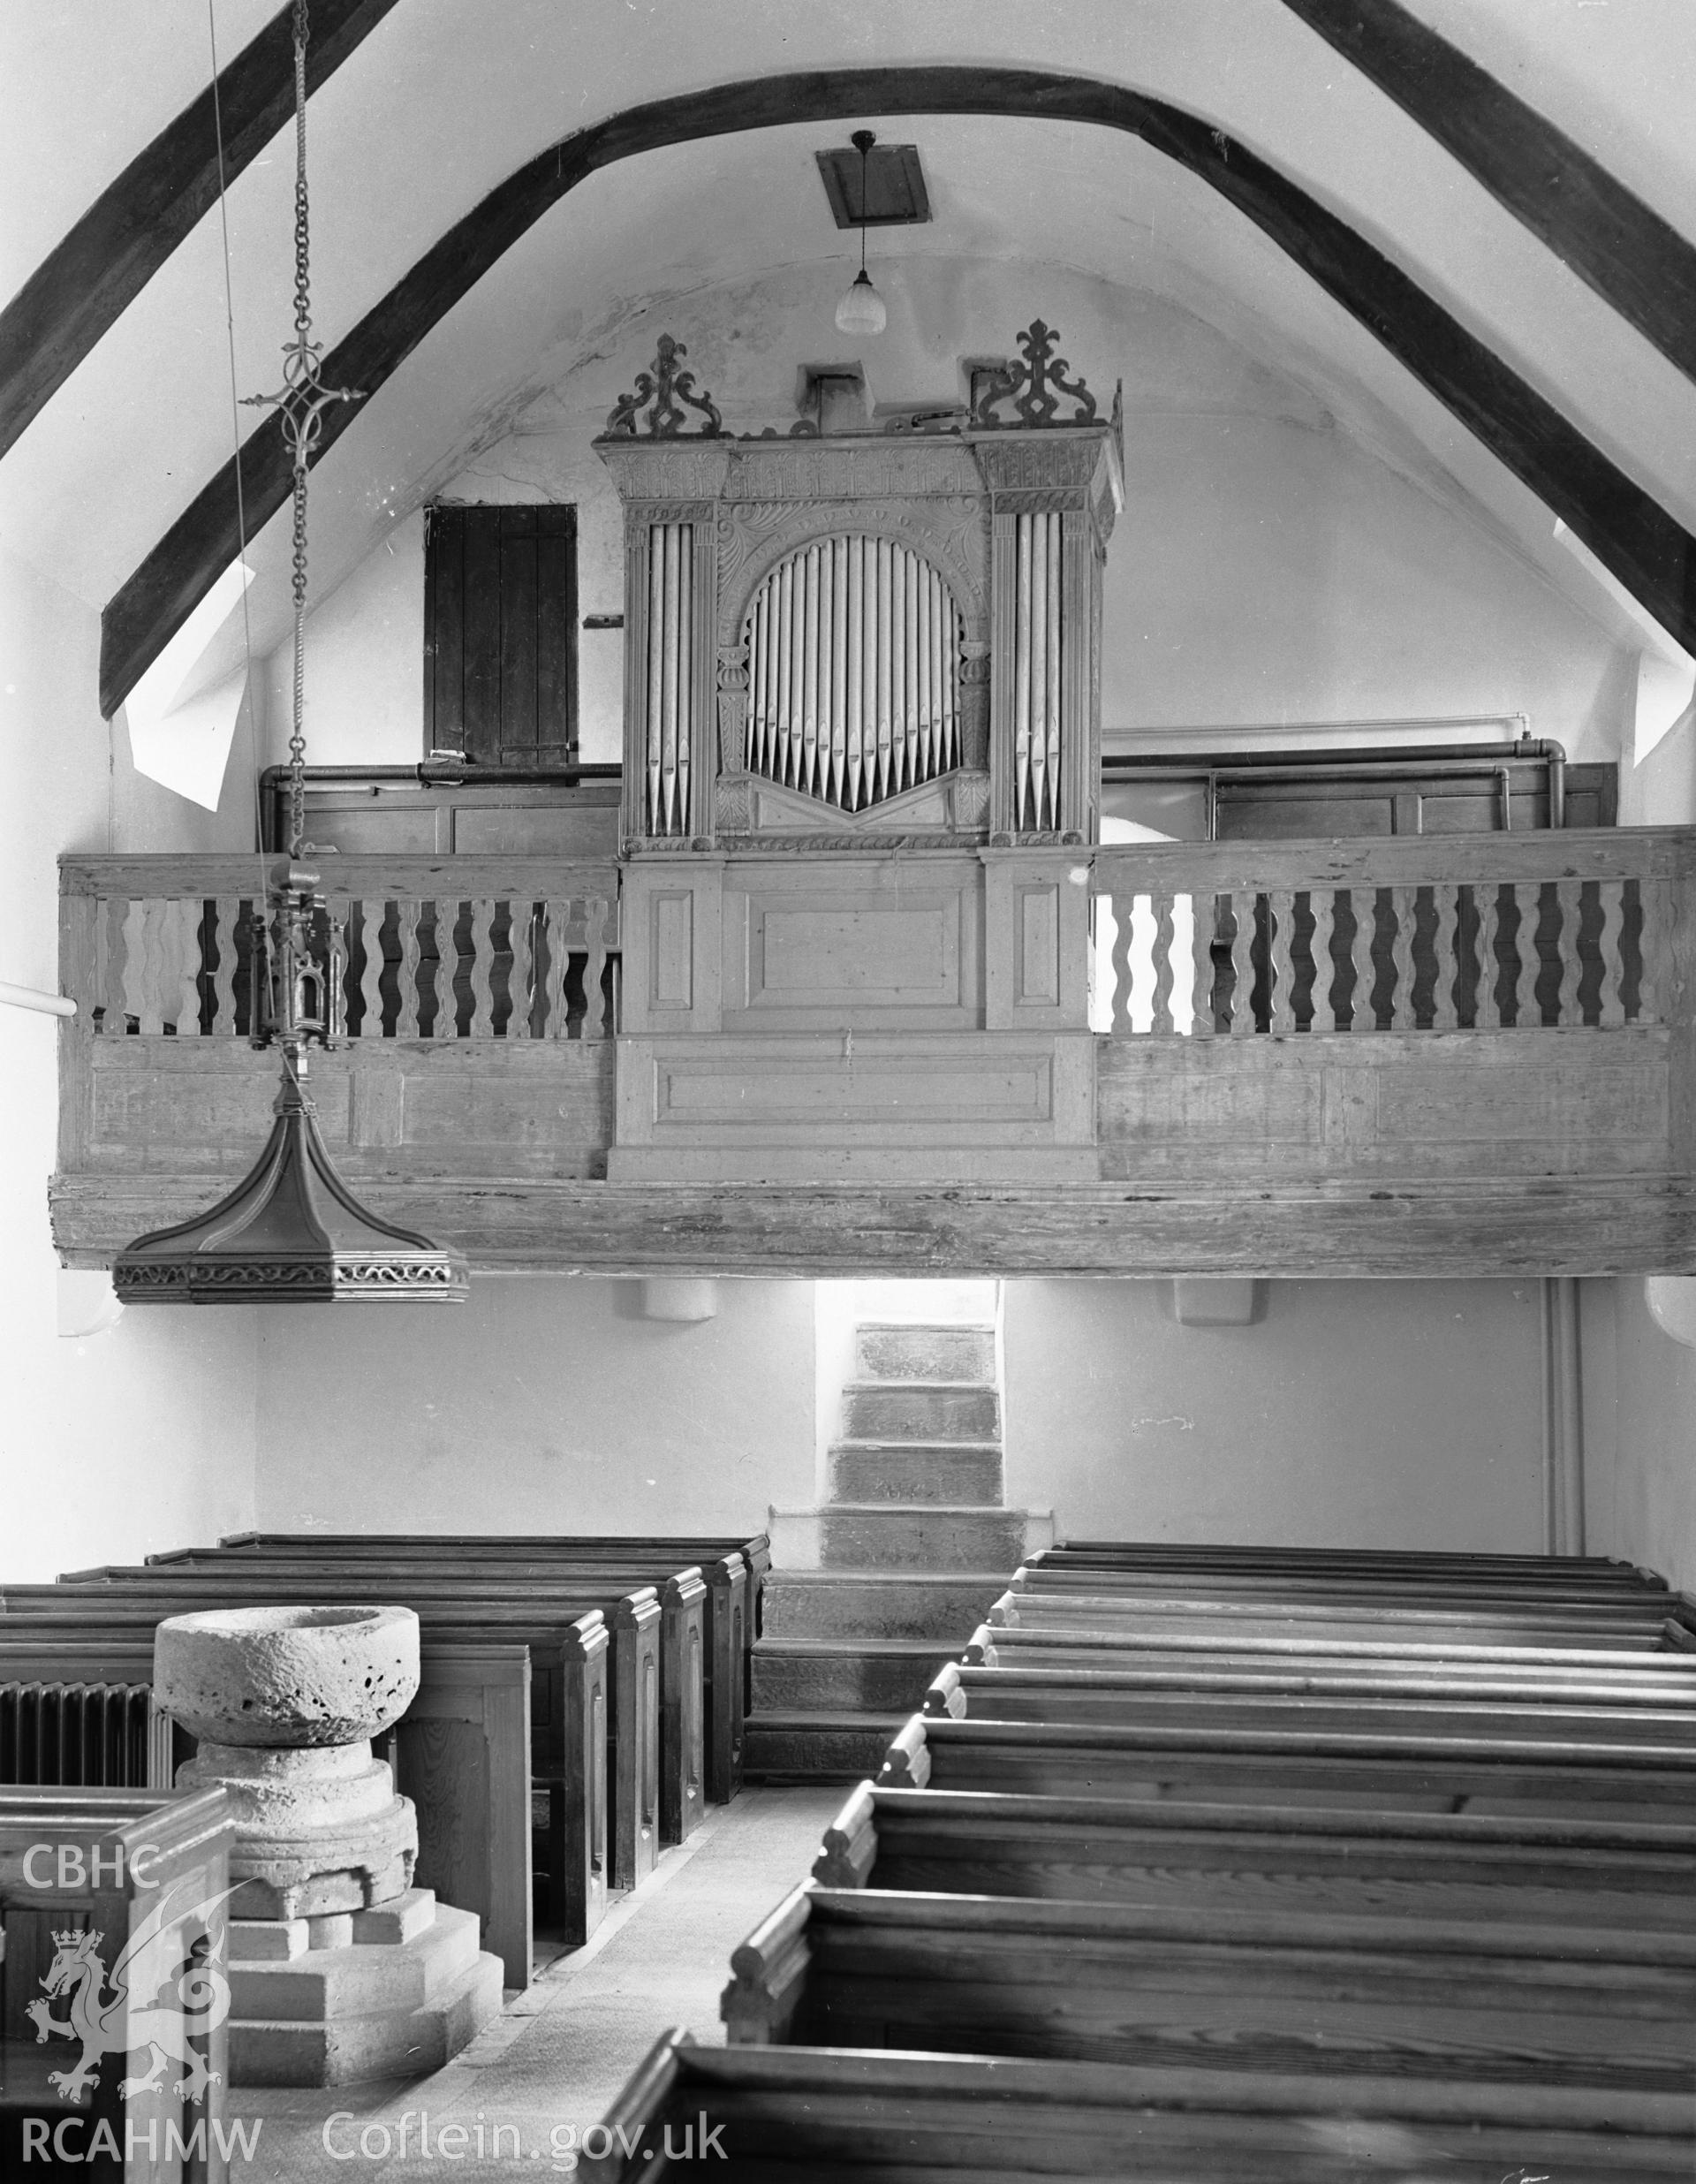 Interior view showing the barrel organ from the east.